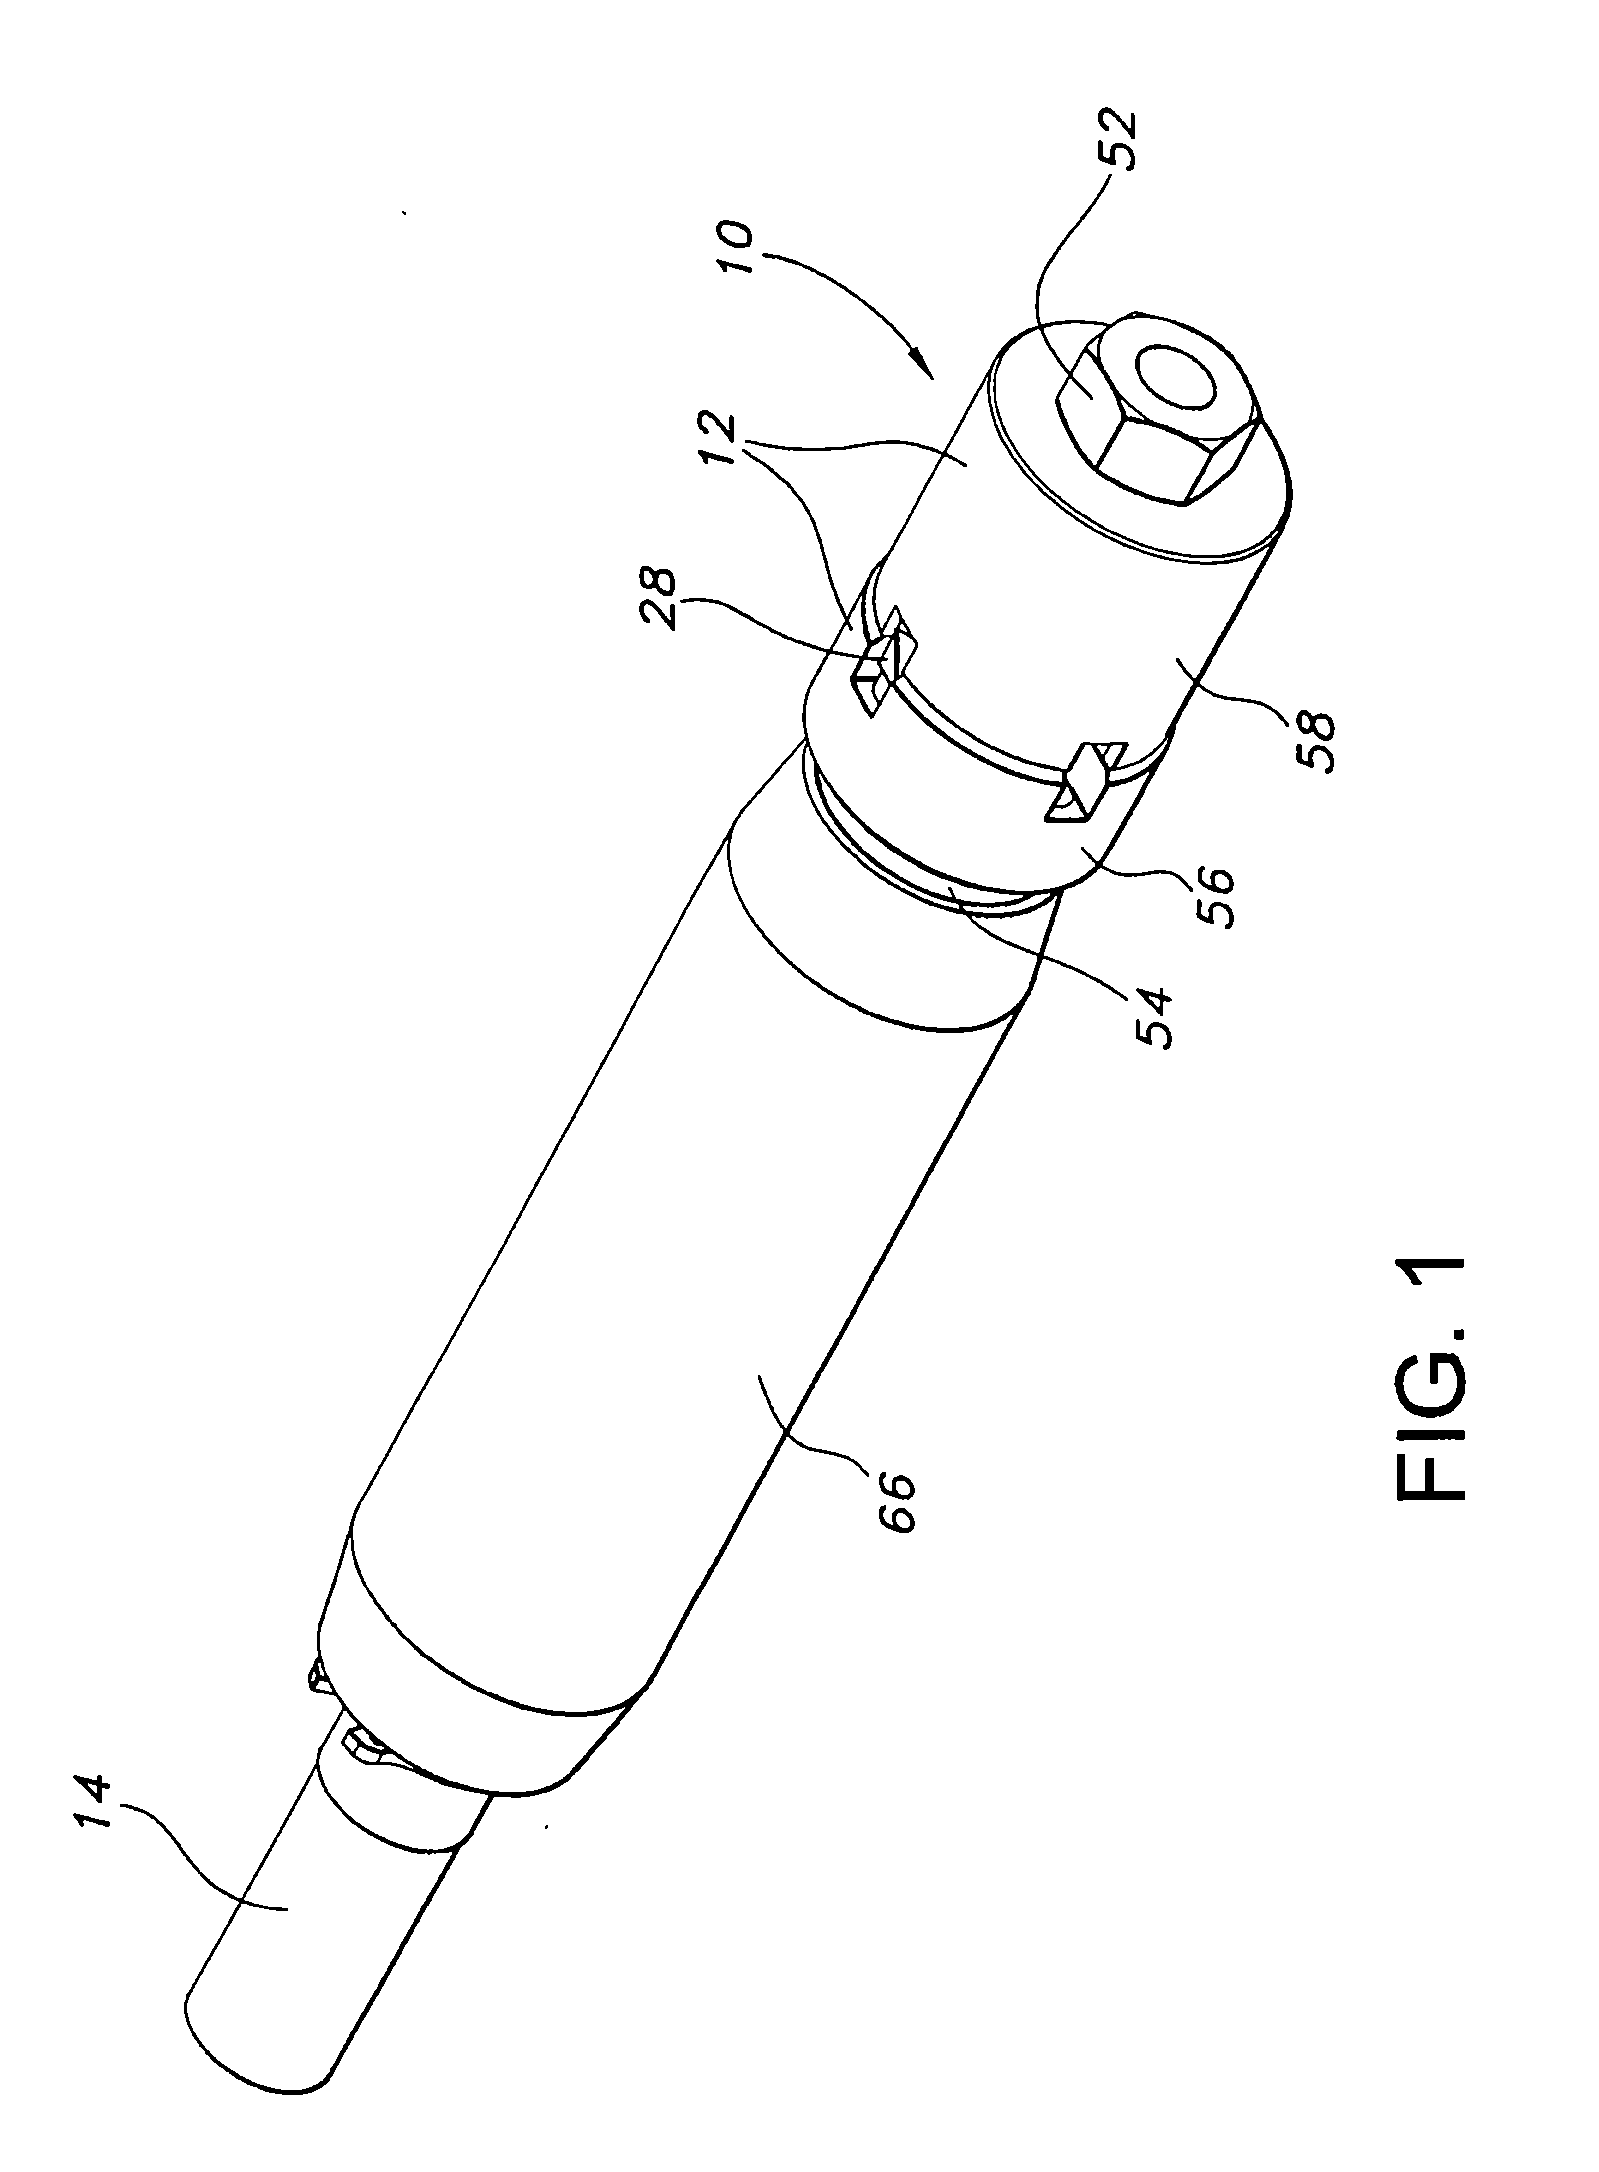 Retractable finning tool and method of using